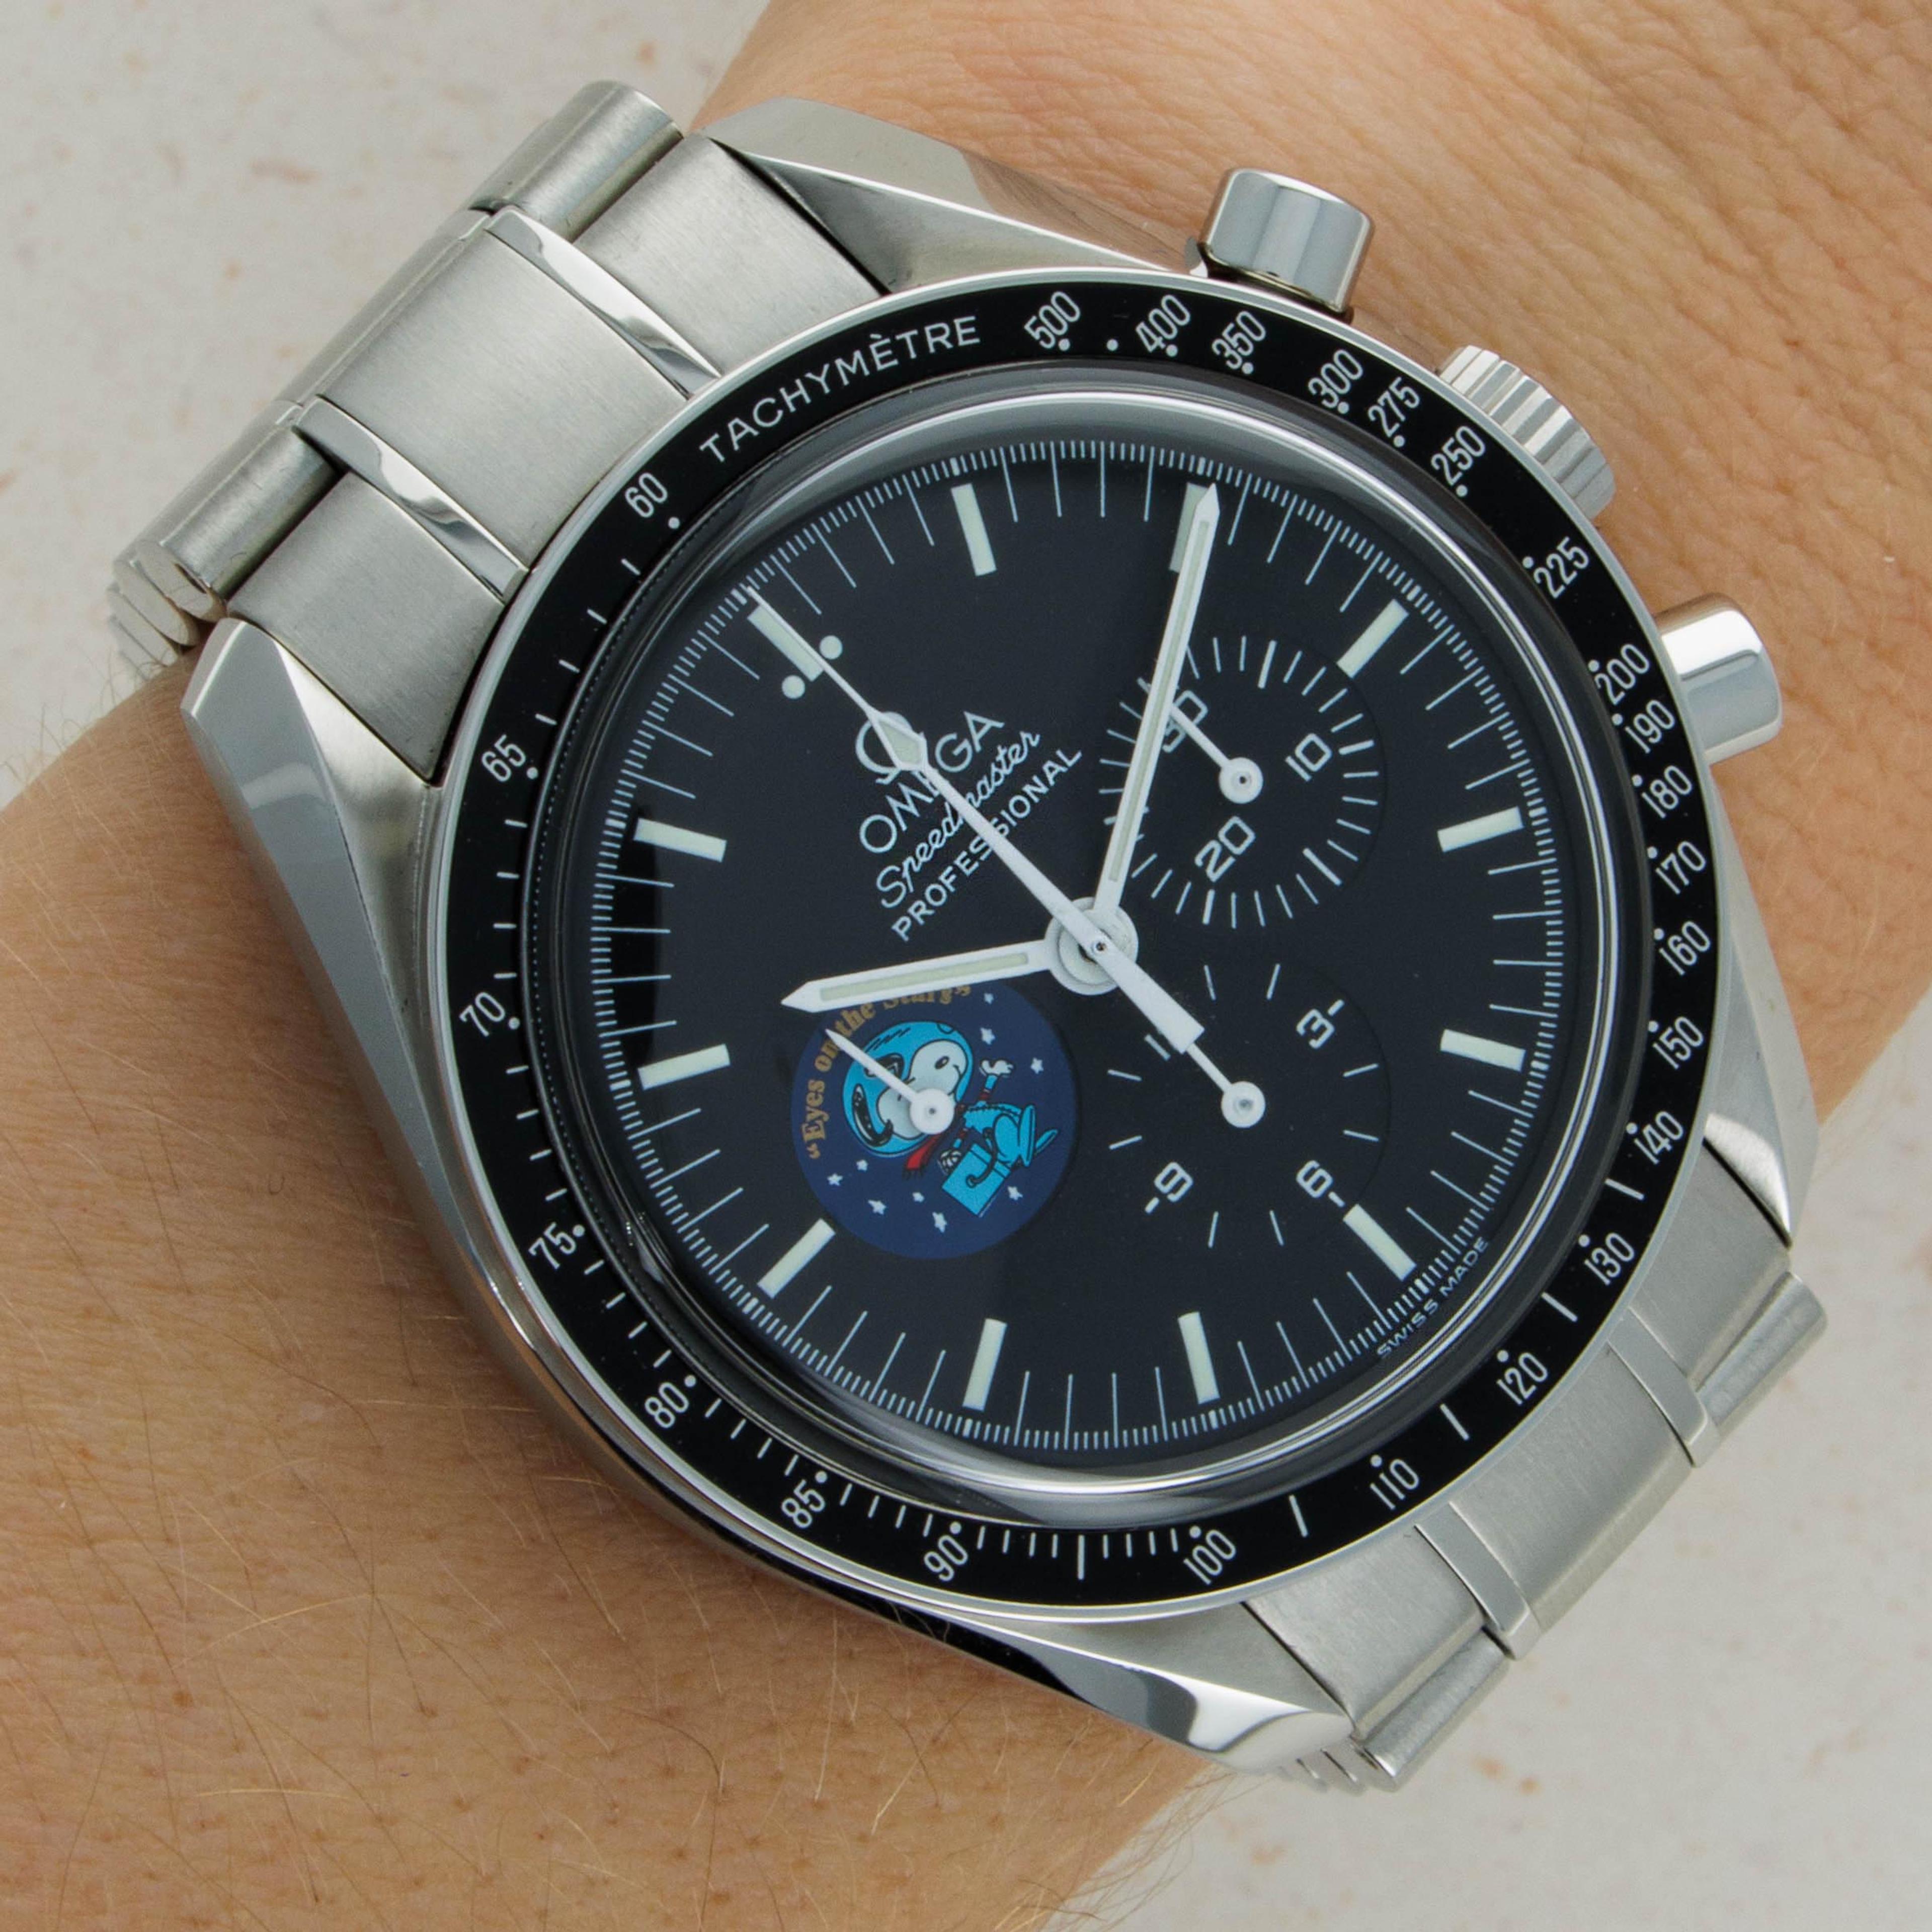 History - Why Snoopy Ended Up On an Omega Speedmaster after Apollo 13